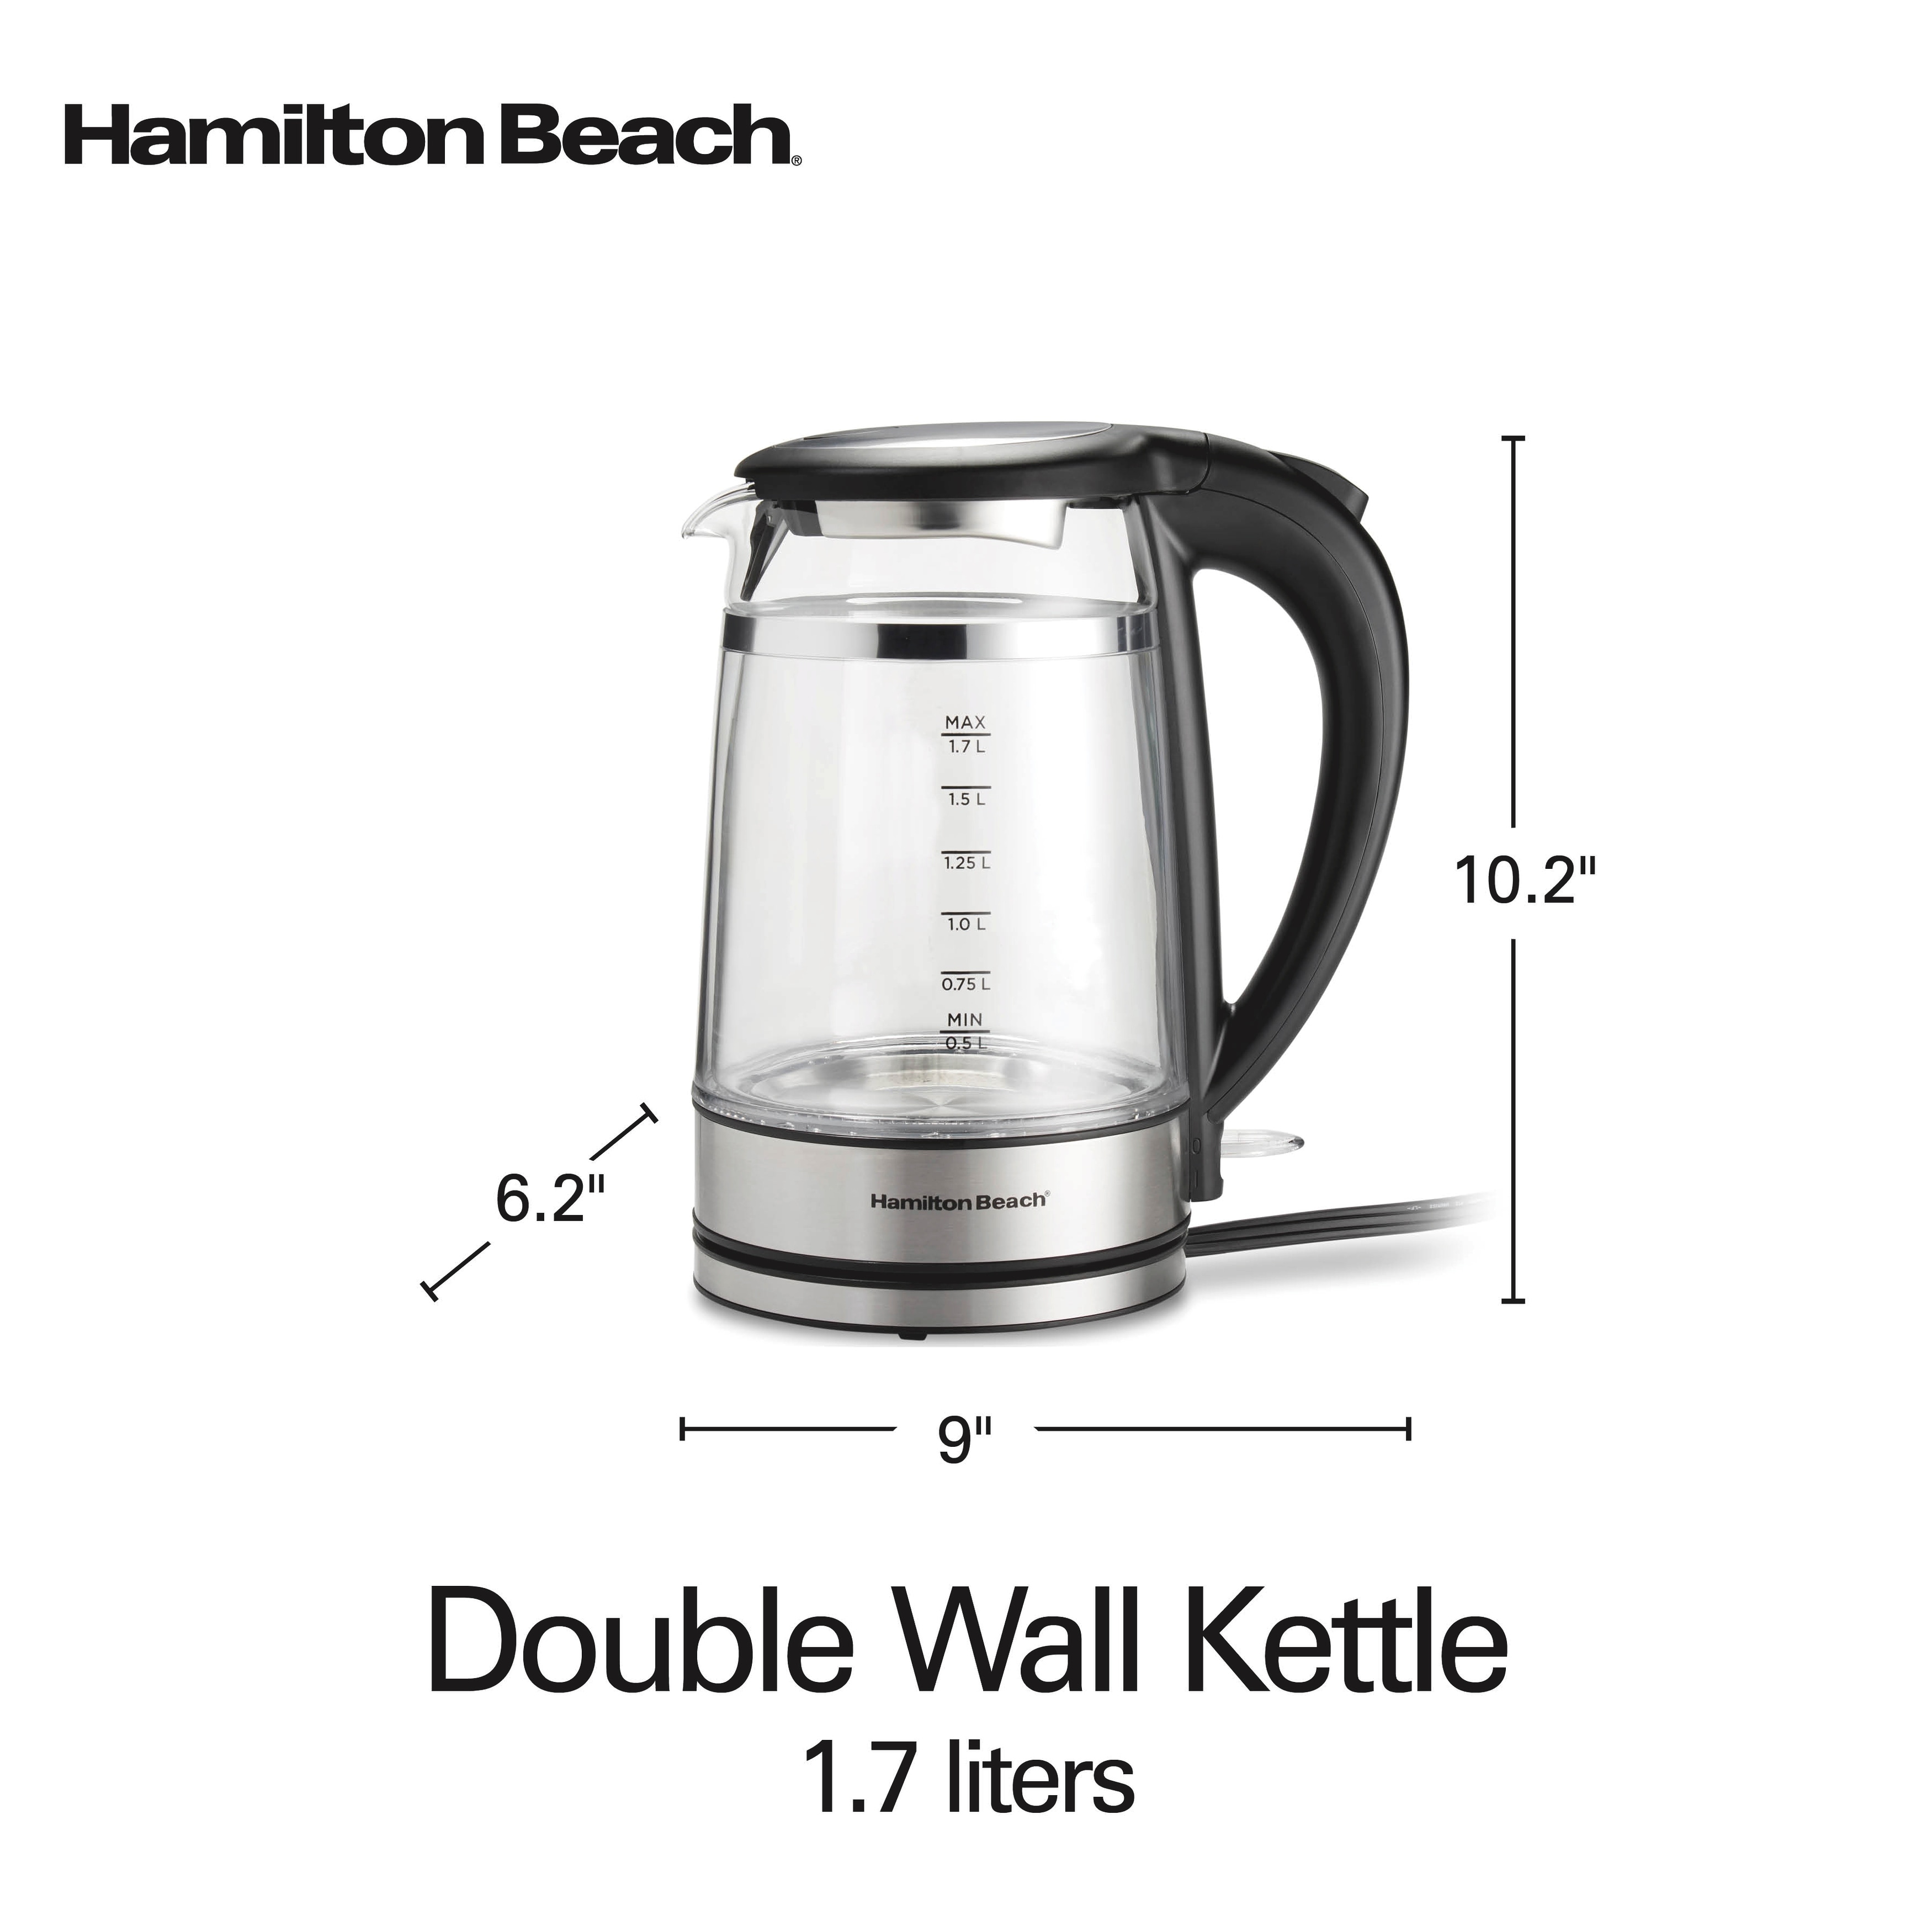 https://ak1.ostkcdn.com/images/products/is/images/direct/1d6a750b3ae0dc87a5af7f7d31b004b8bfffa49b/Hamilton-Beach-1.7-Liter-Double-Wall-Kettle.jpg